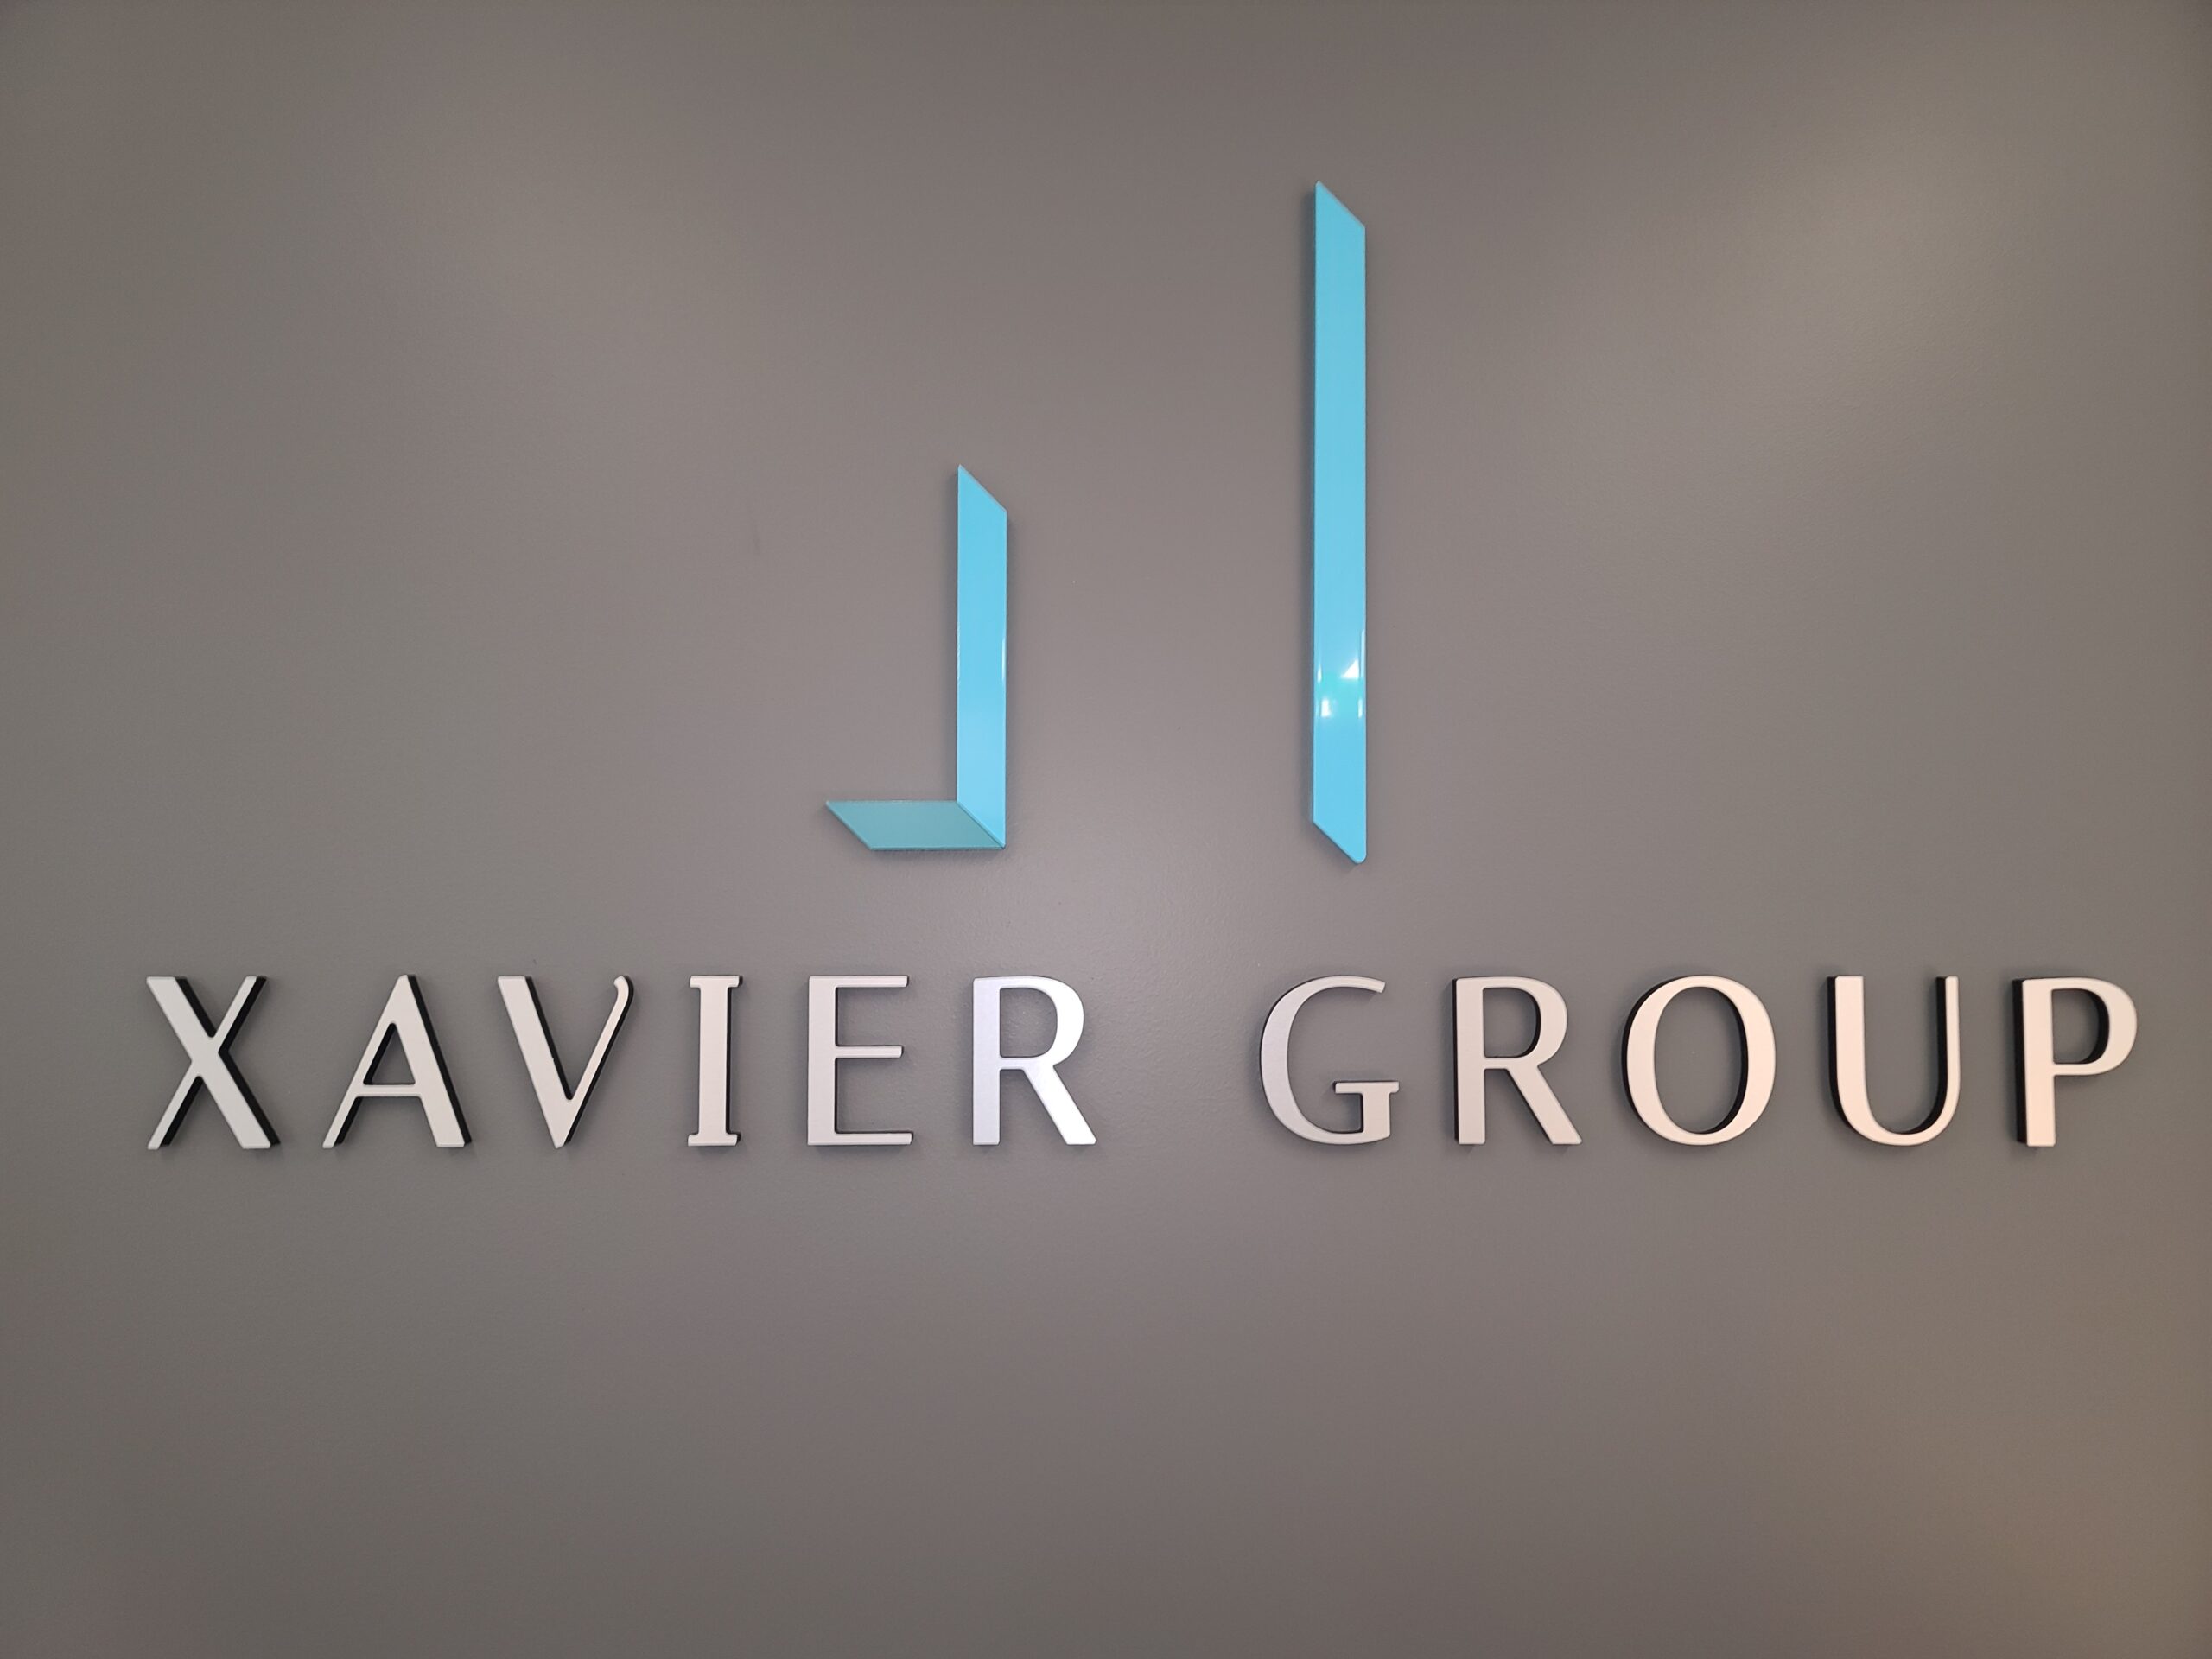 The Xavier Group deserves signage of the same caliber as their products and services, such as our black acrylic letters lobby sign for their Los Angeles office.